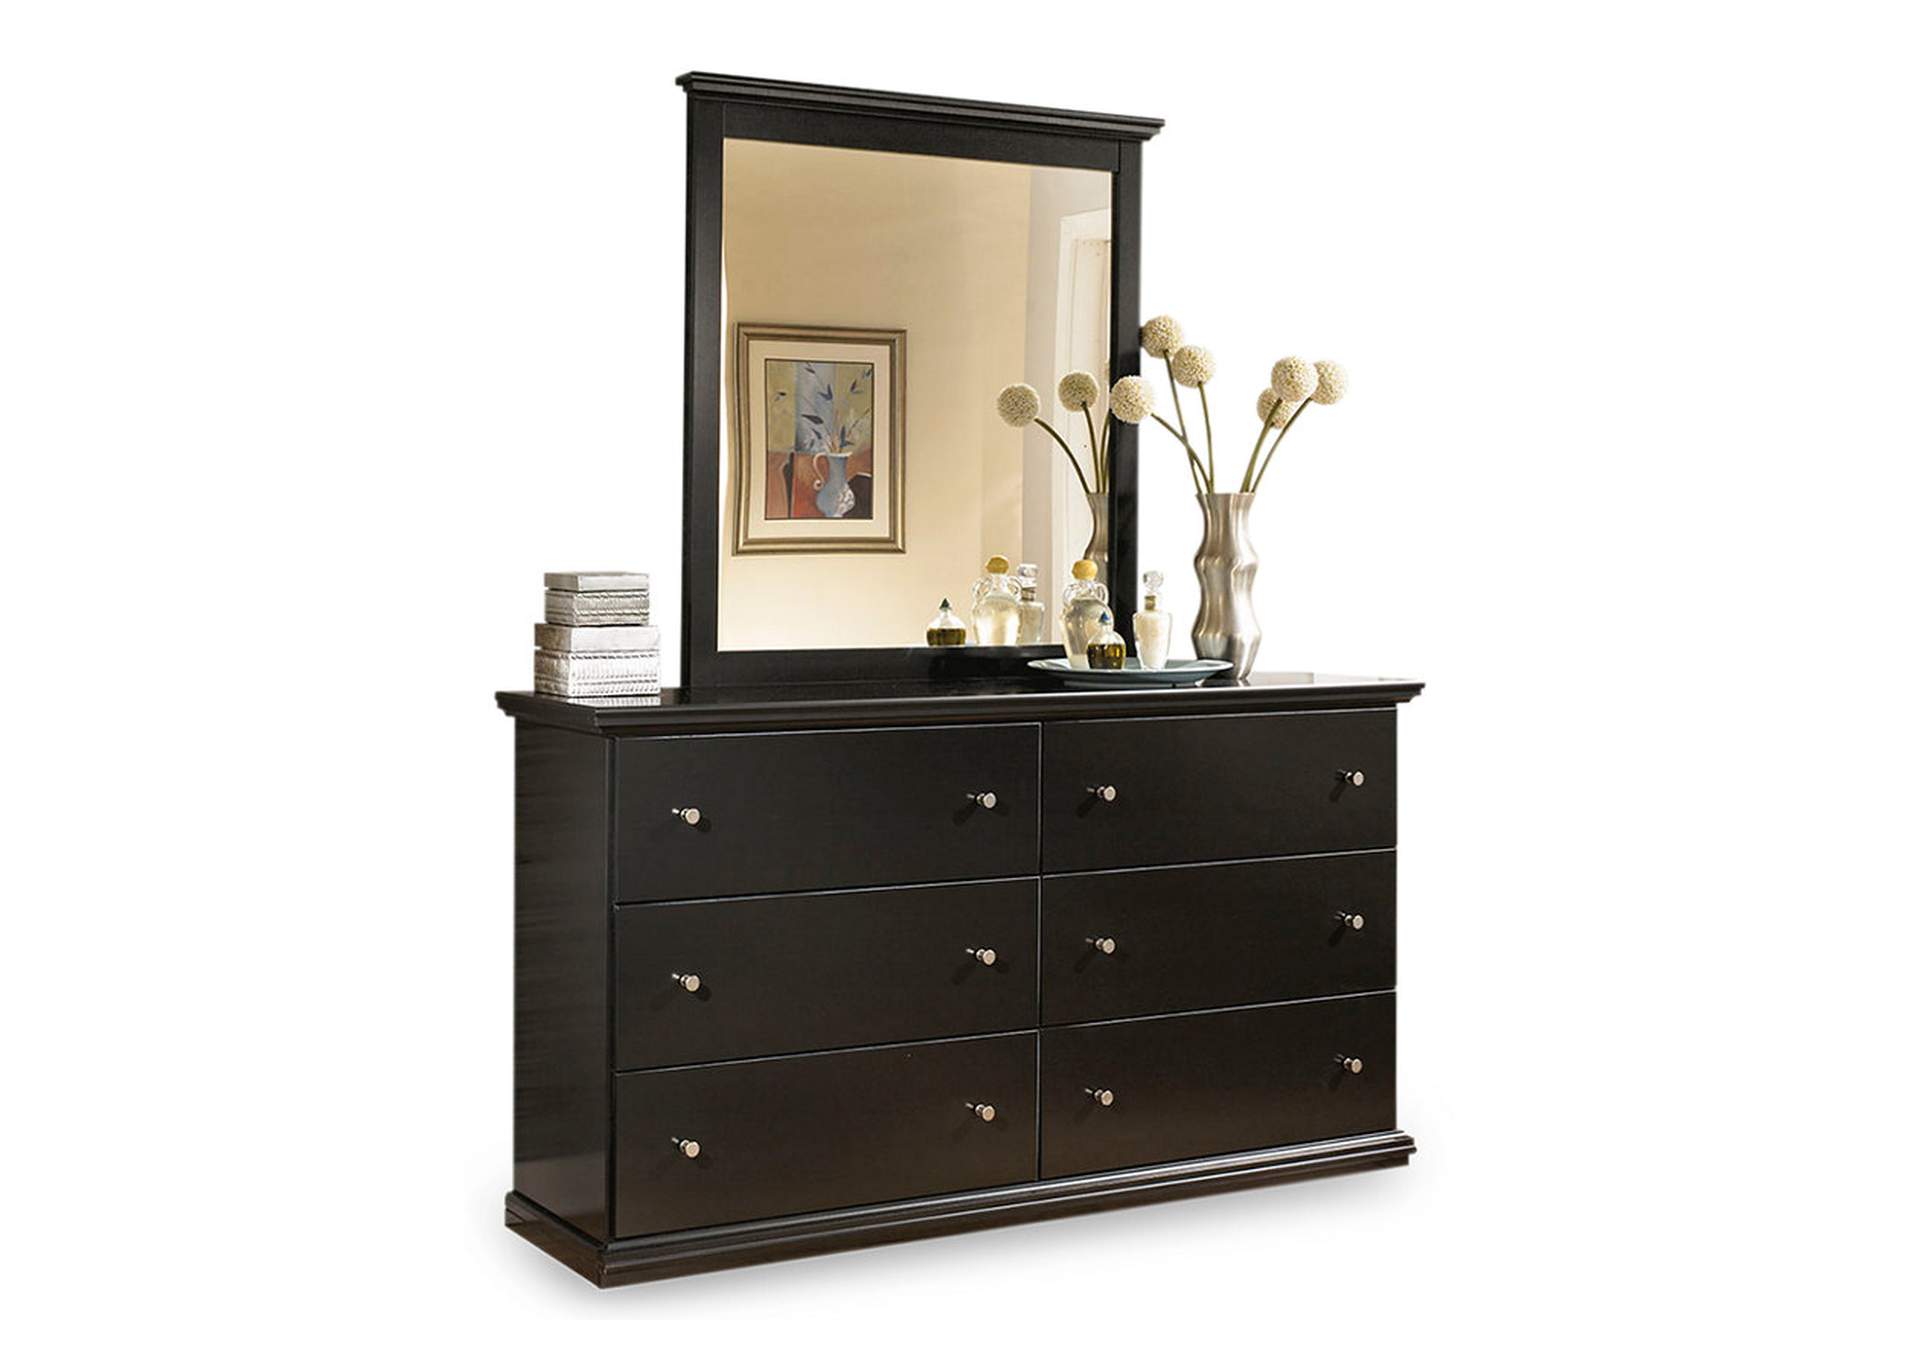 Maribel Queen/Full Panel Headboard Bed with Mirrored Dresser,Signature Design By Ashley